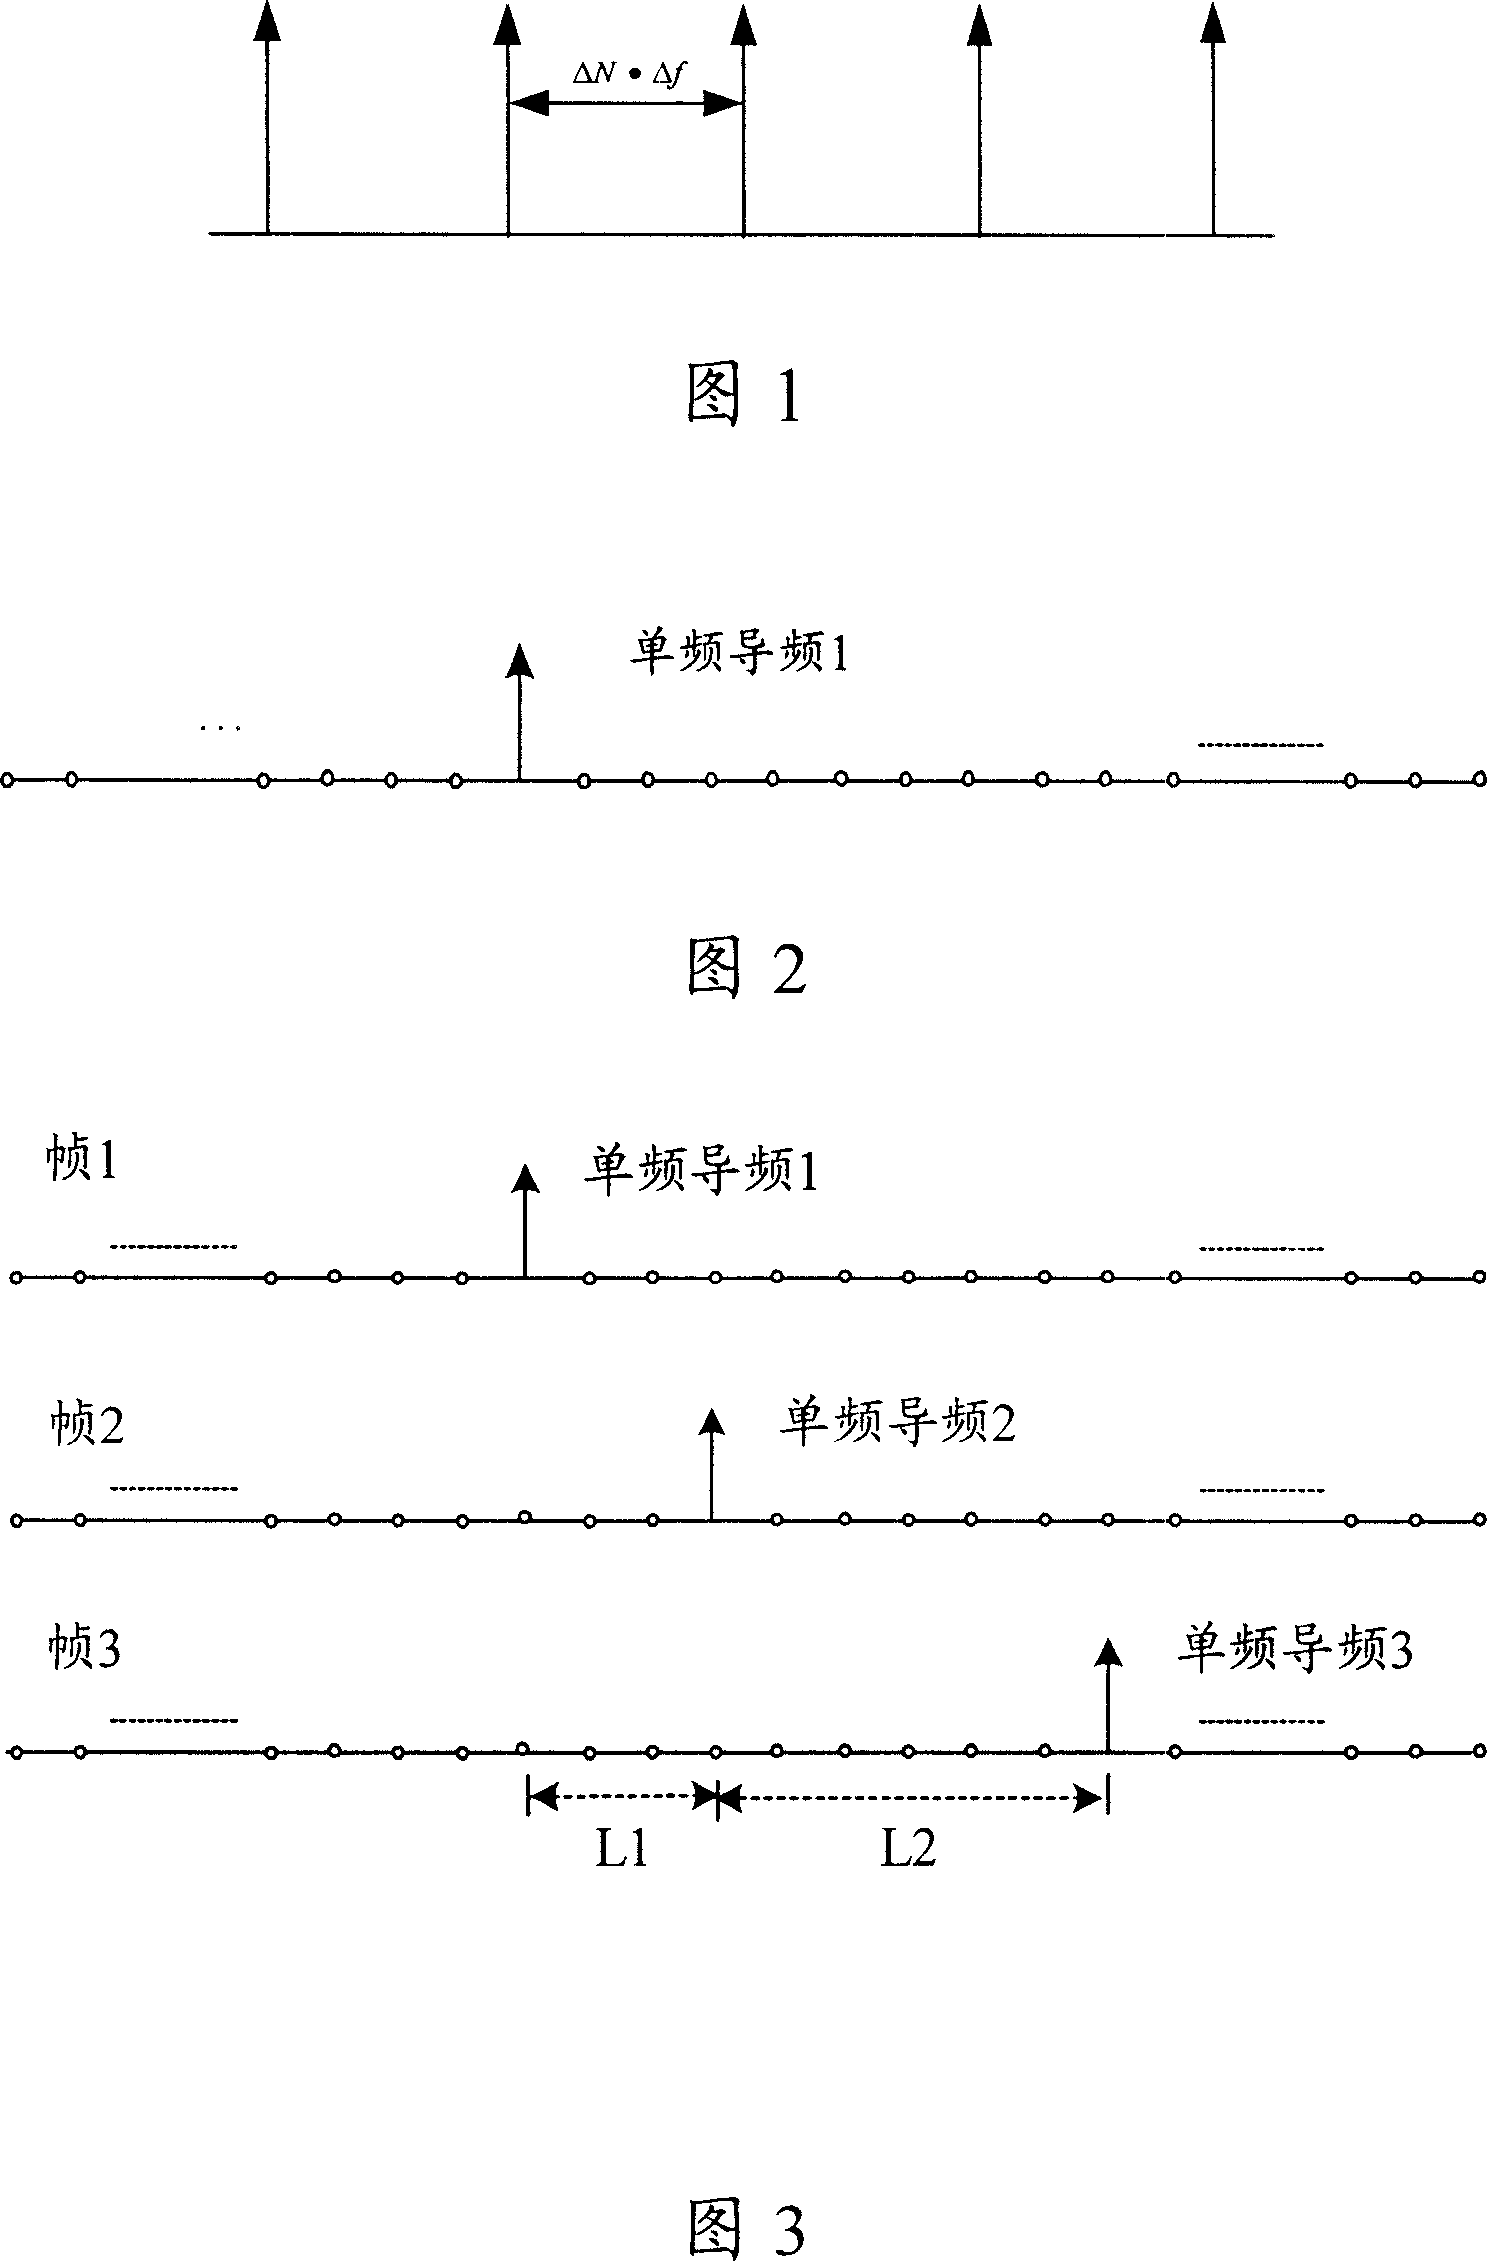 Synchronous pilot frequency sequence forming system and method in communication system